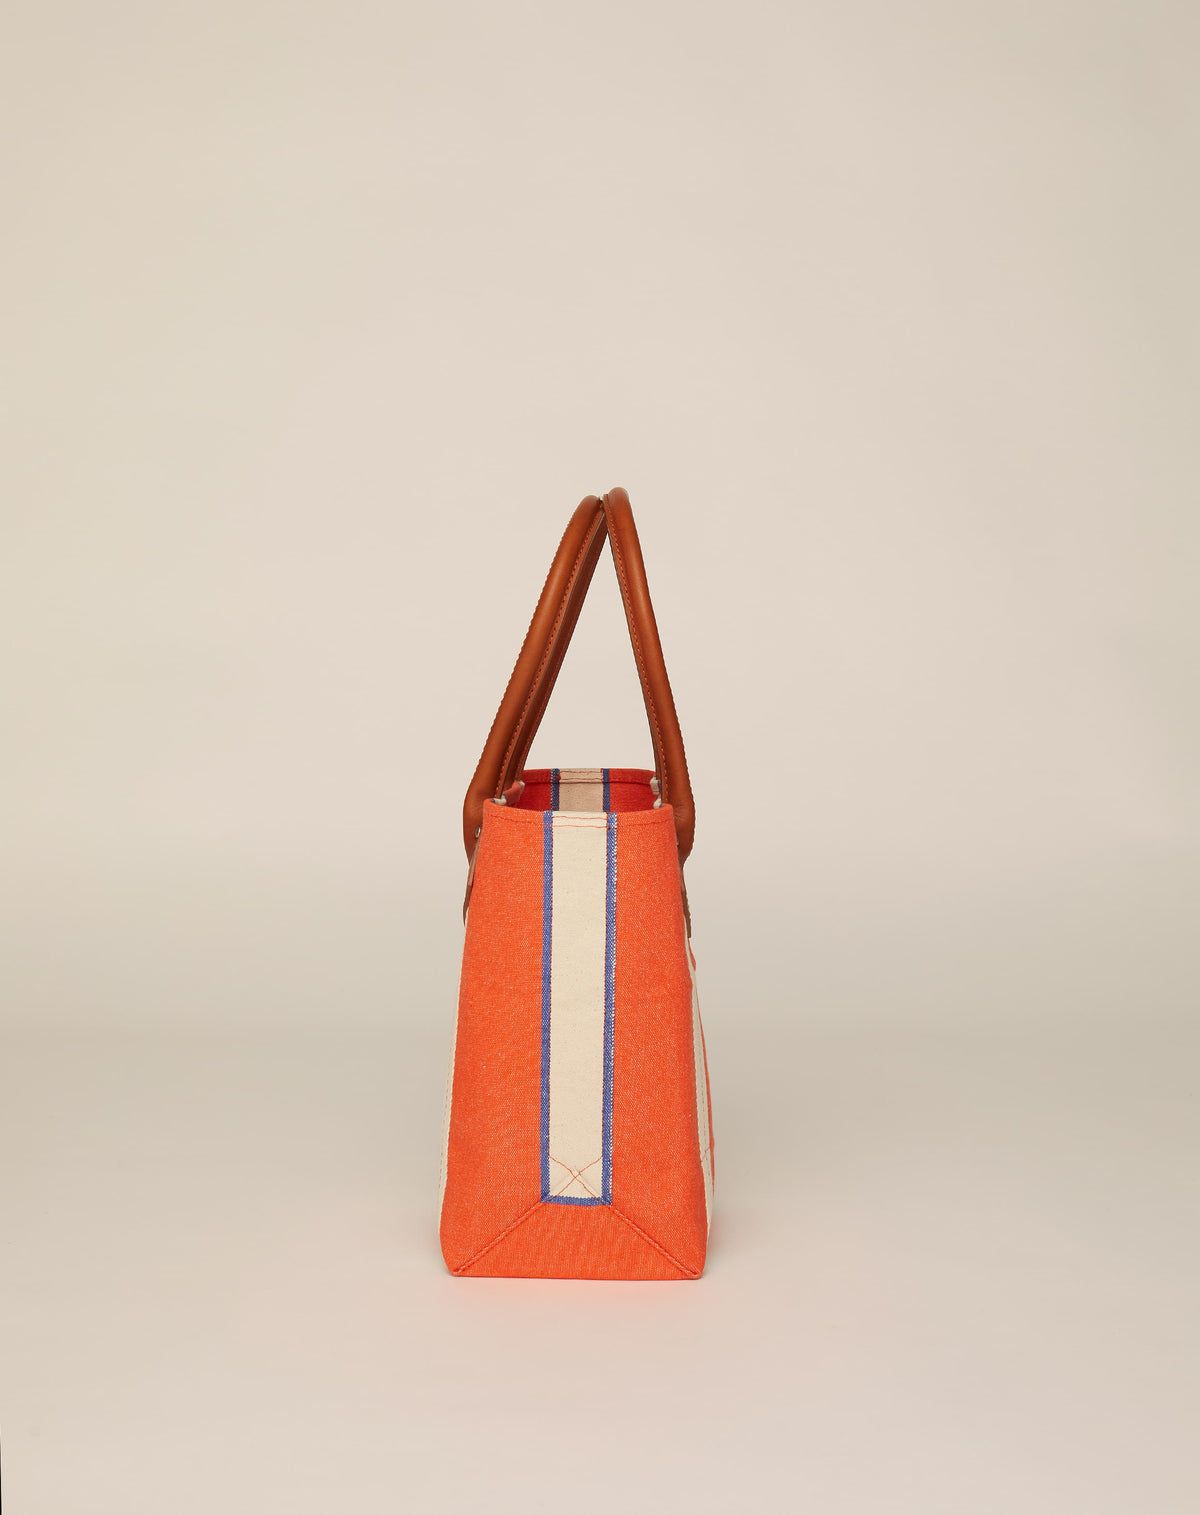 Side image of small classic canvas tote bag in orange colour with tan leather handles and contrasting stripes.